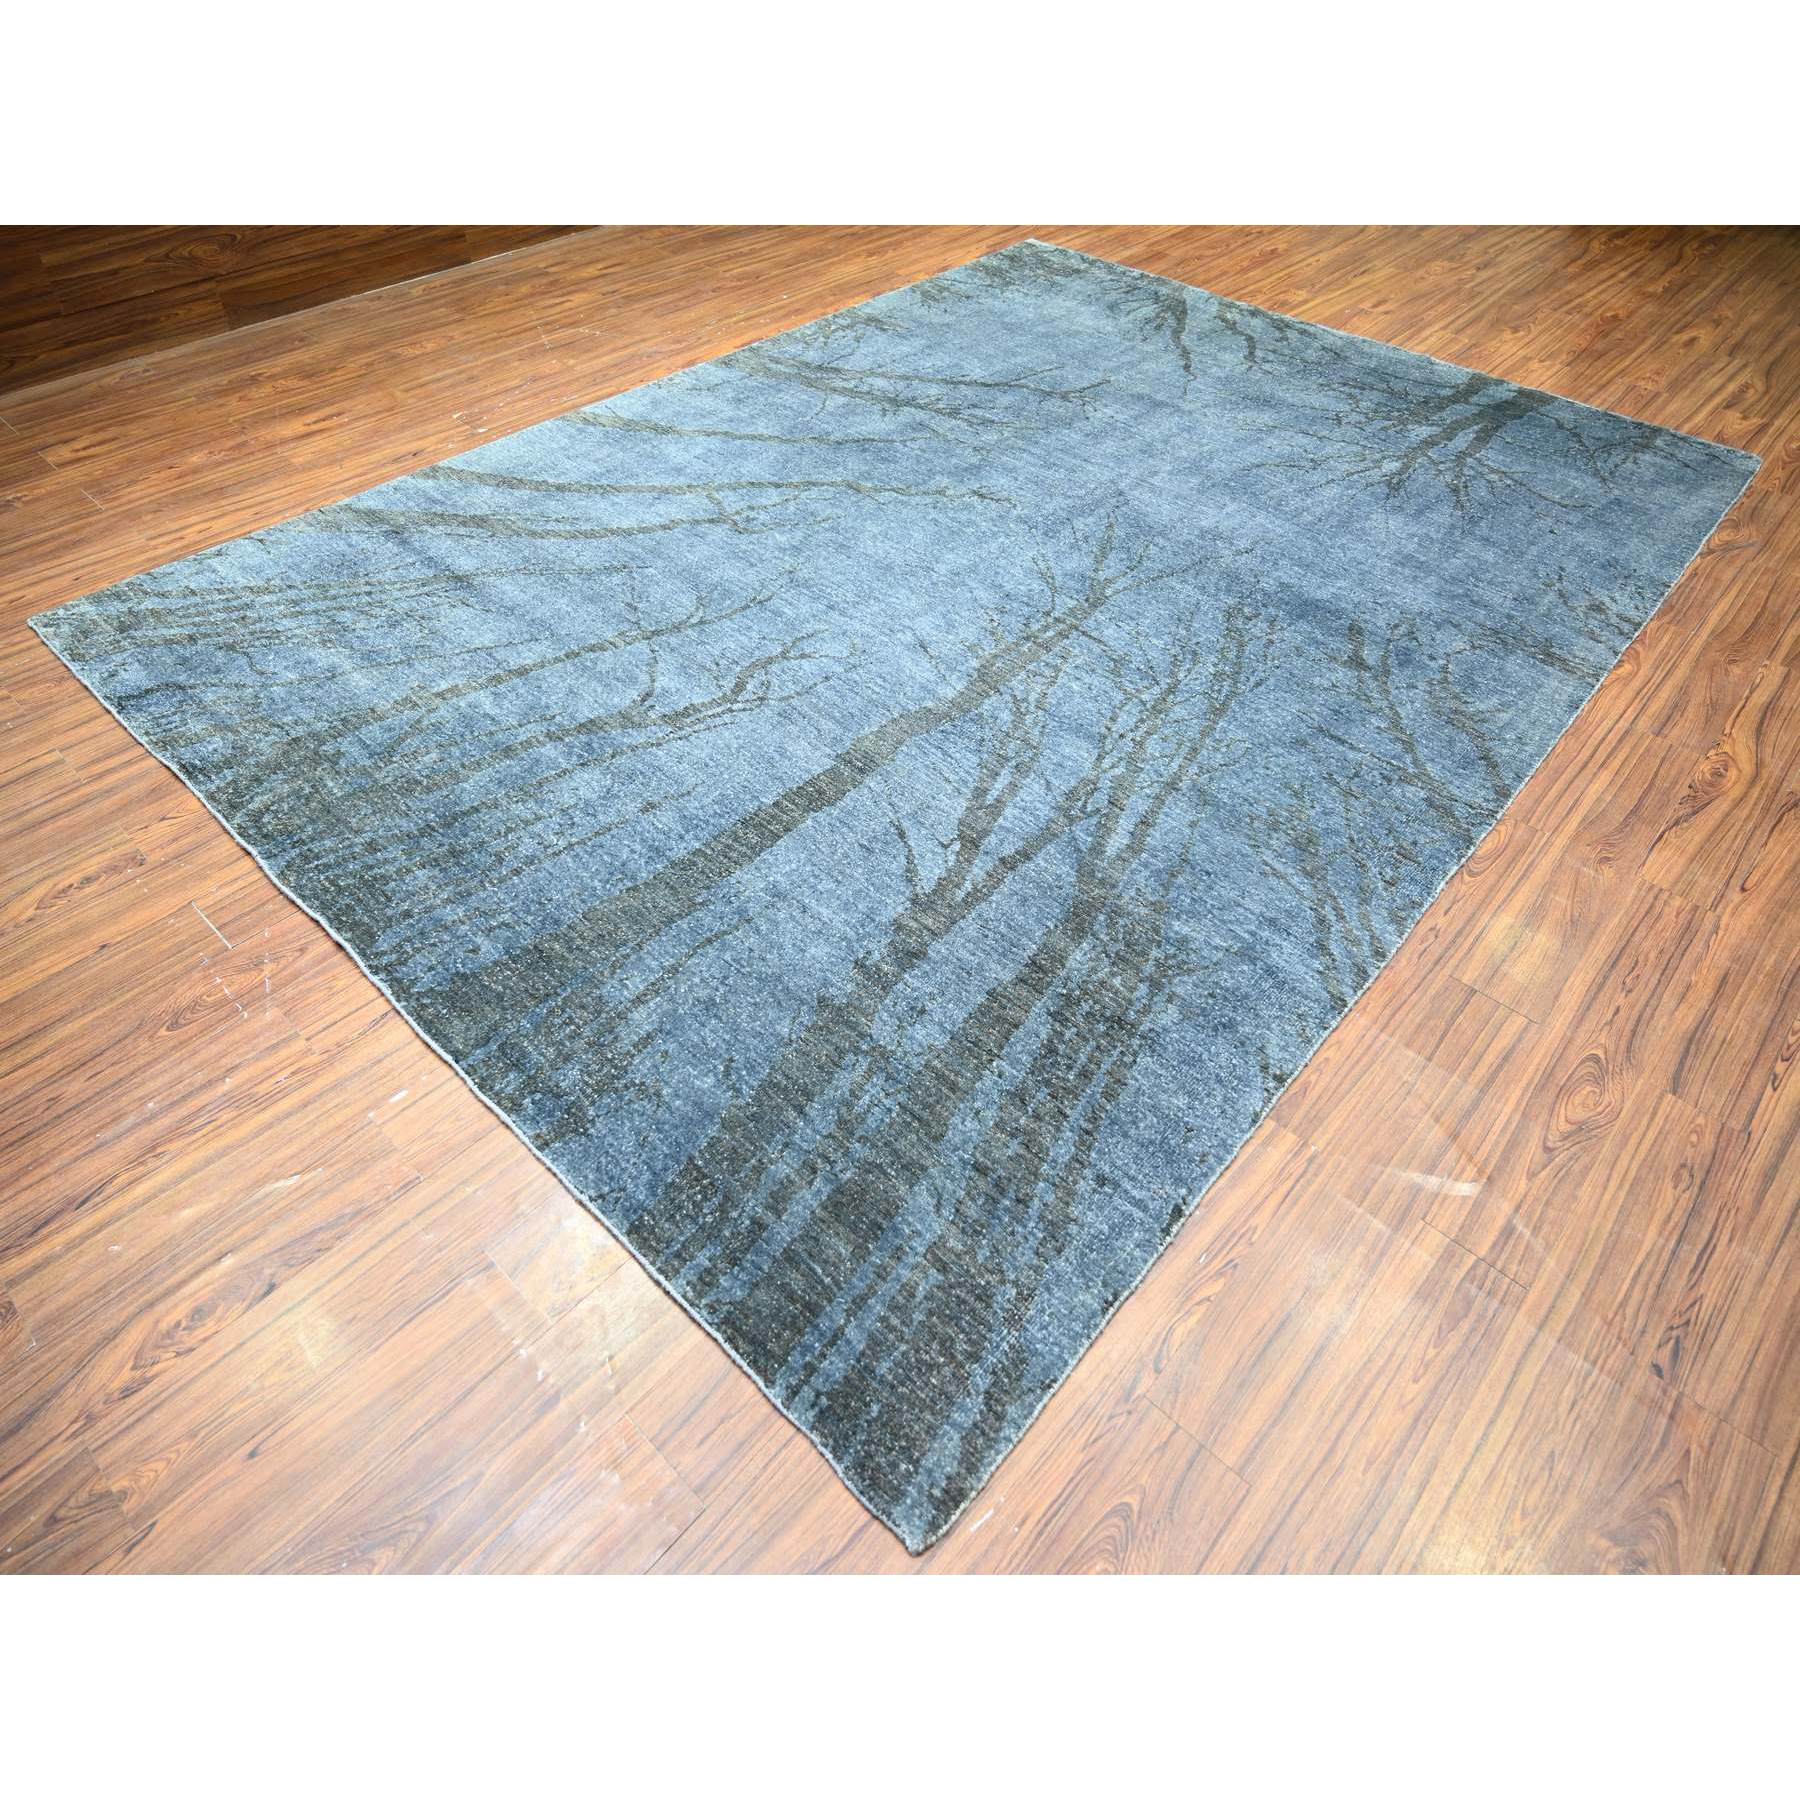 8'10"x12'1" Blue Gray, Modern Tree in the Dusk Design, 100% Wool, Natural Dyes, Tone on Tone, Hand Woven, Oriental Rug 